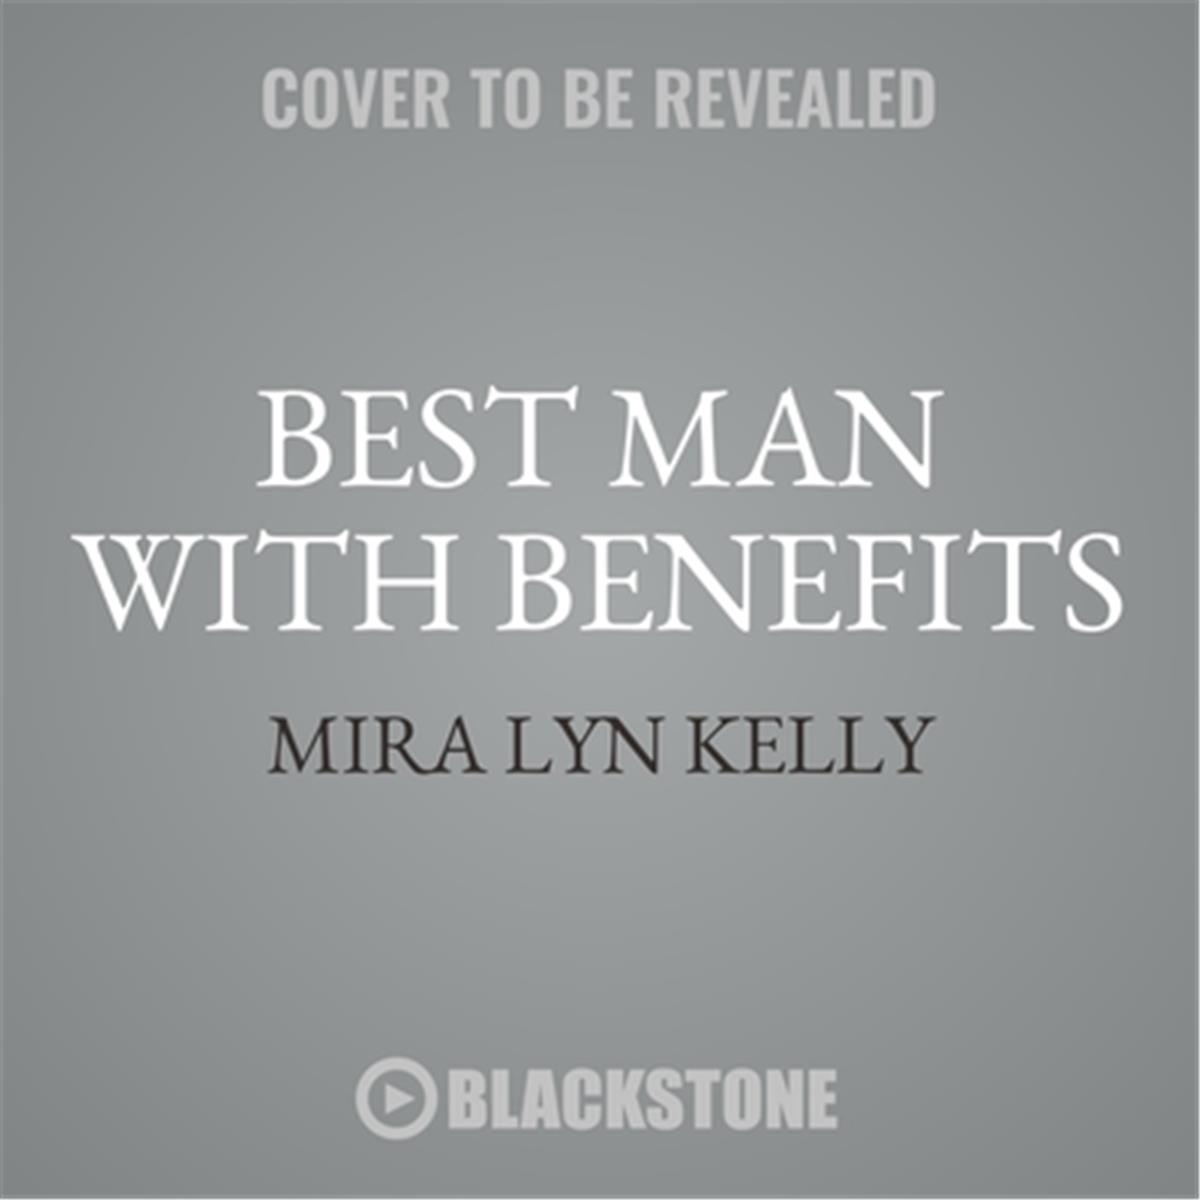 Picture of Blackstone Audio 9781441733665 Best Man with Benefits Audio Book